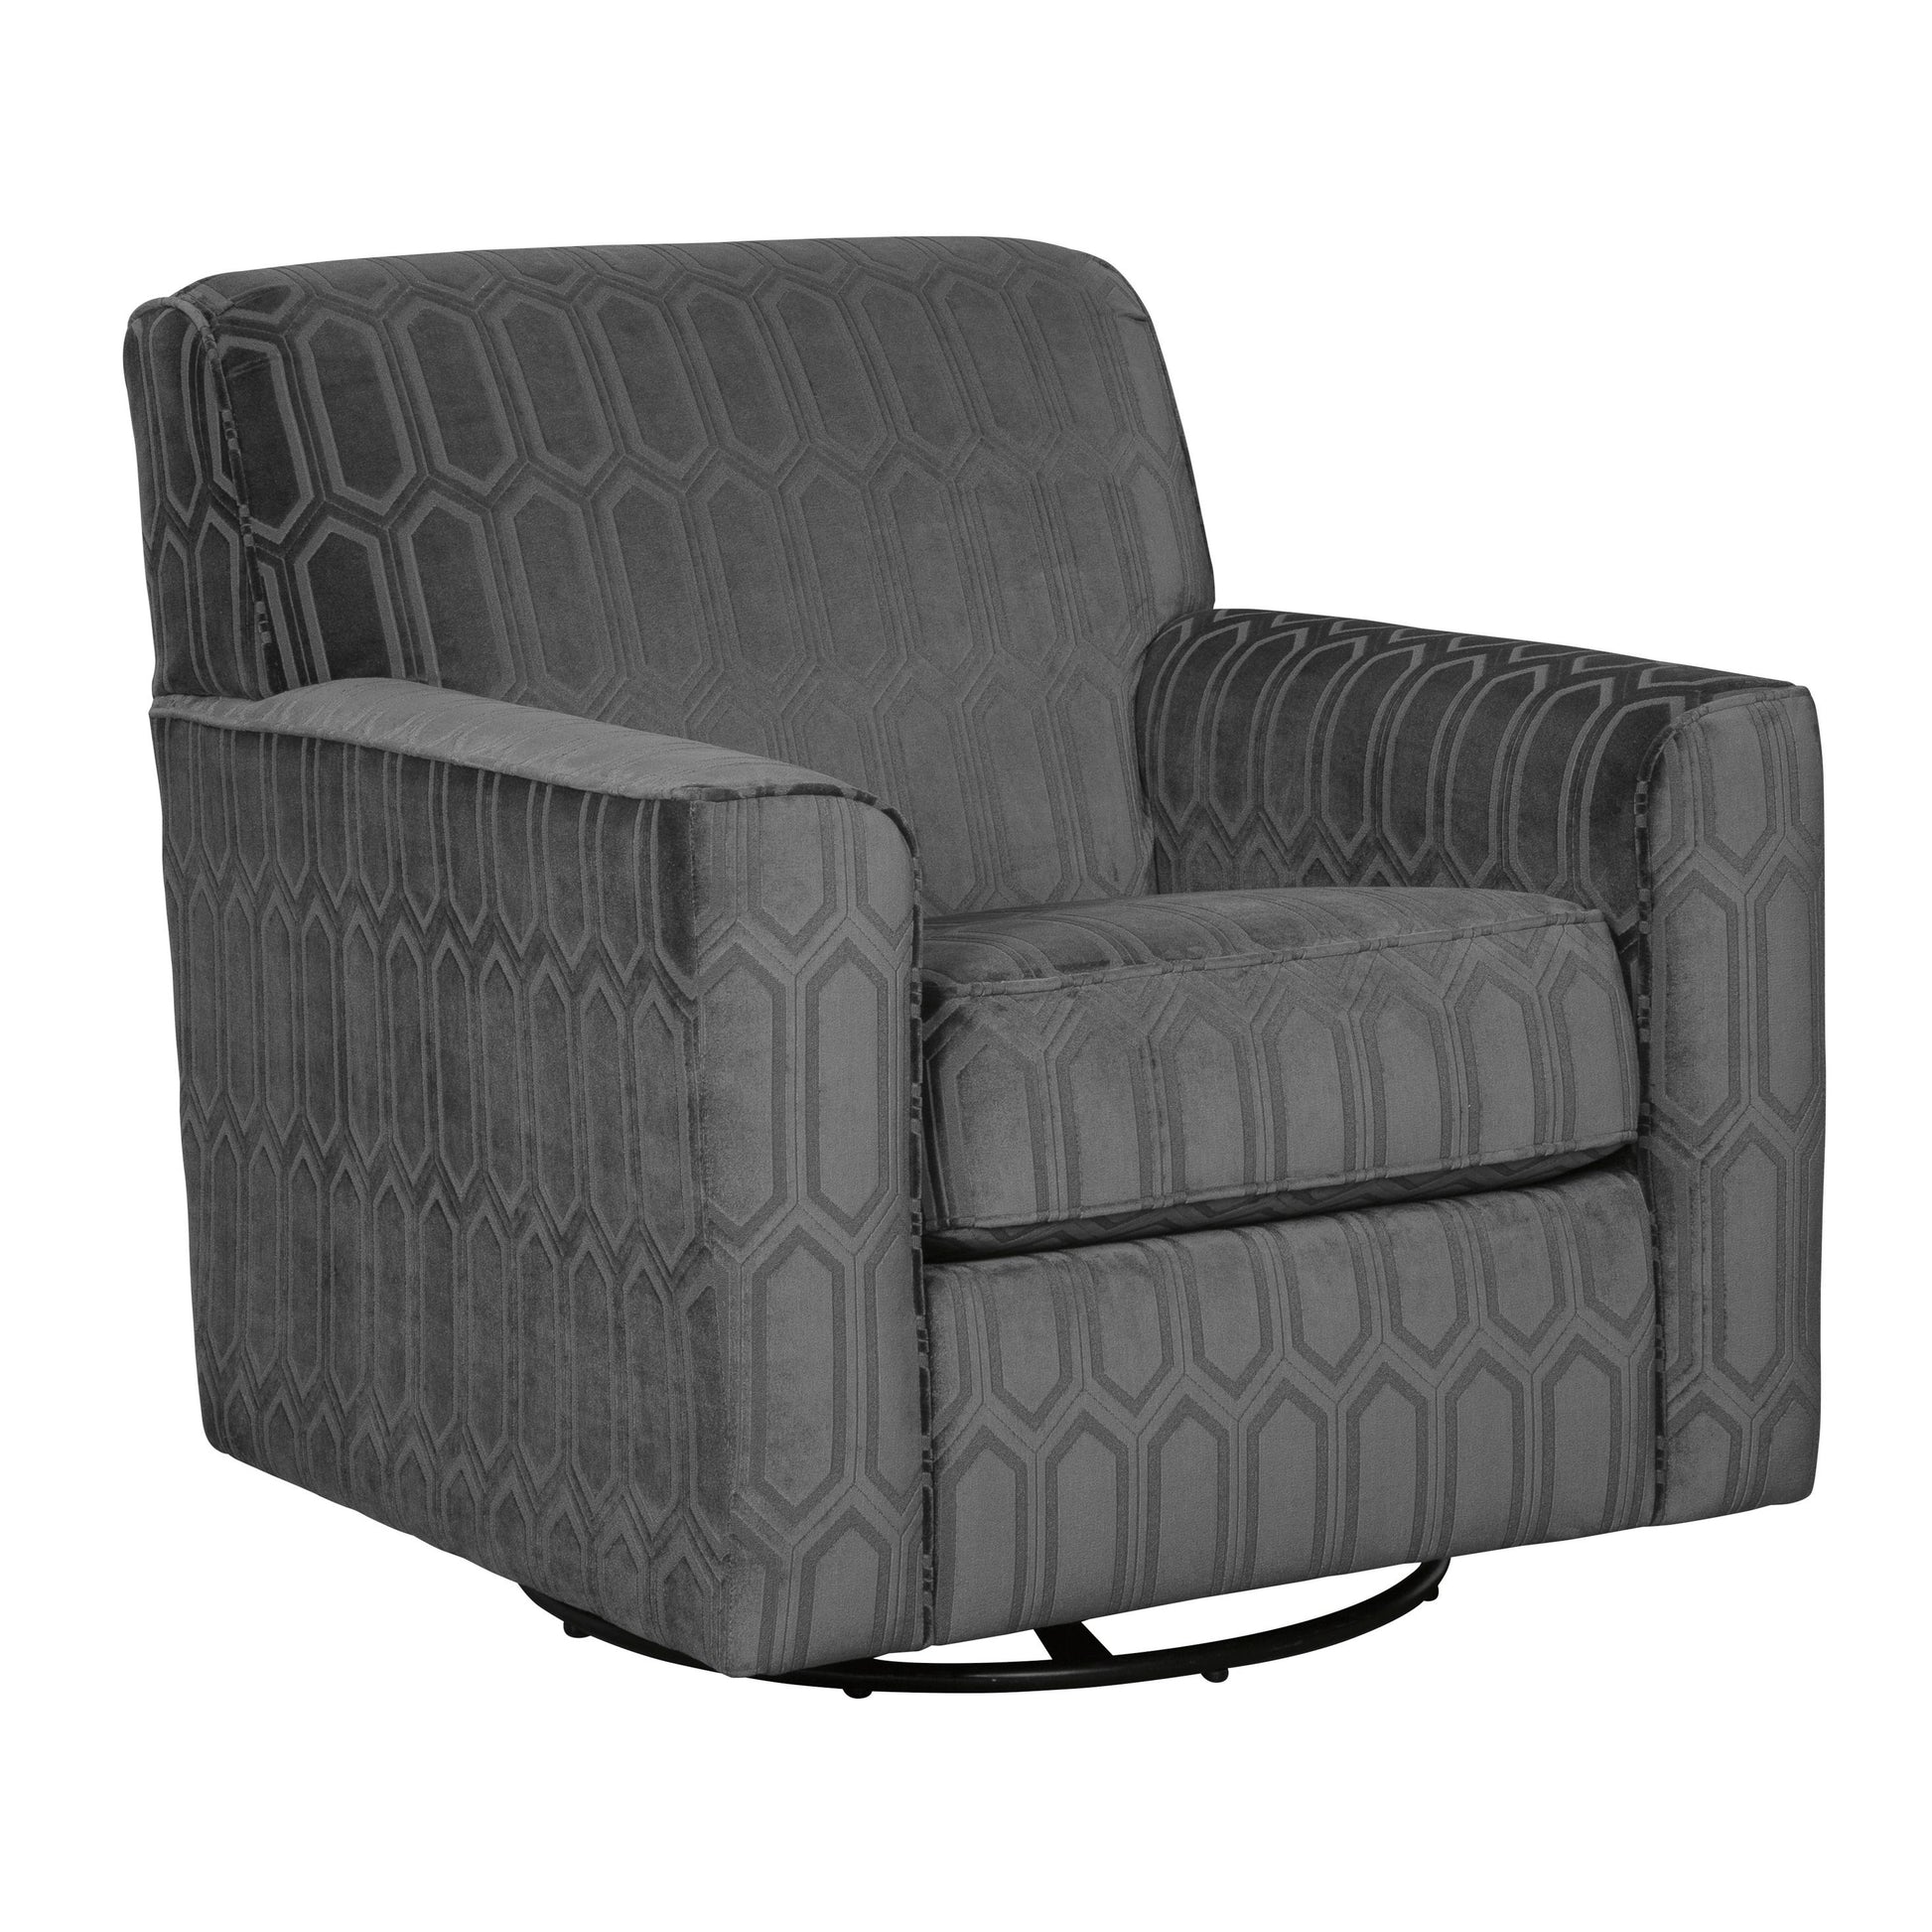 Signature Design by Ashley Zarina Swvel Fabric Accent Chair 9770442